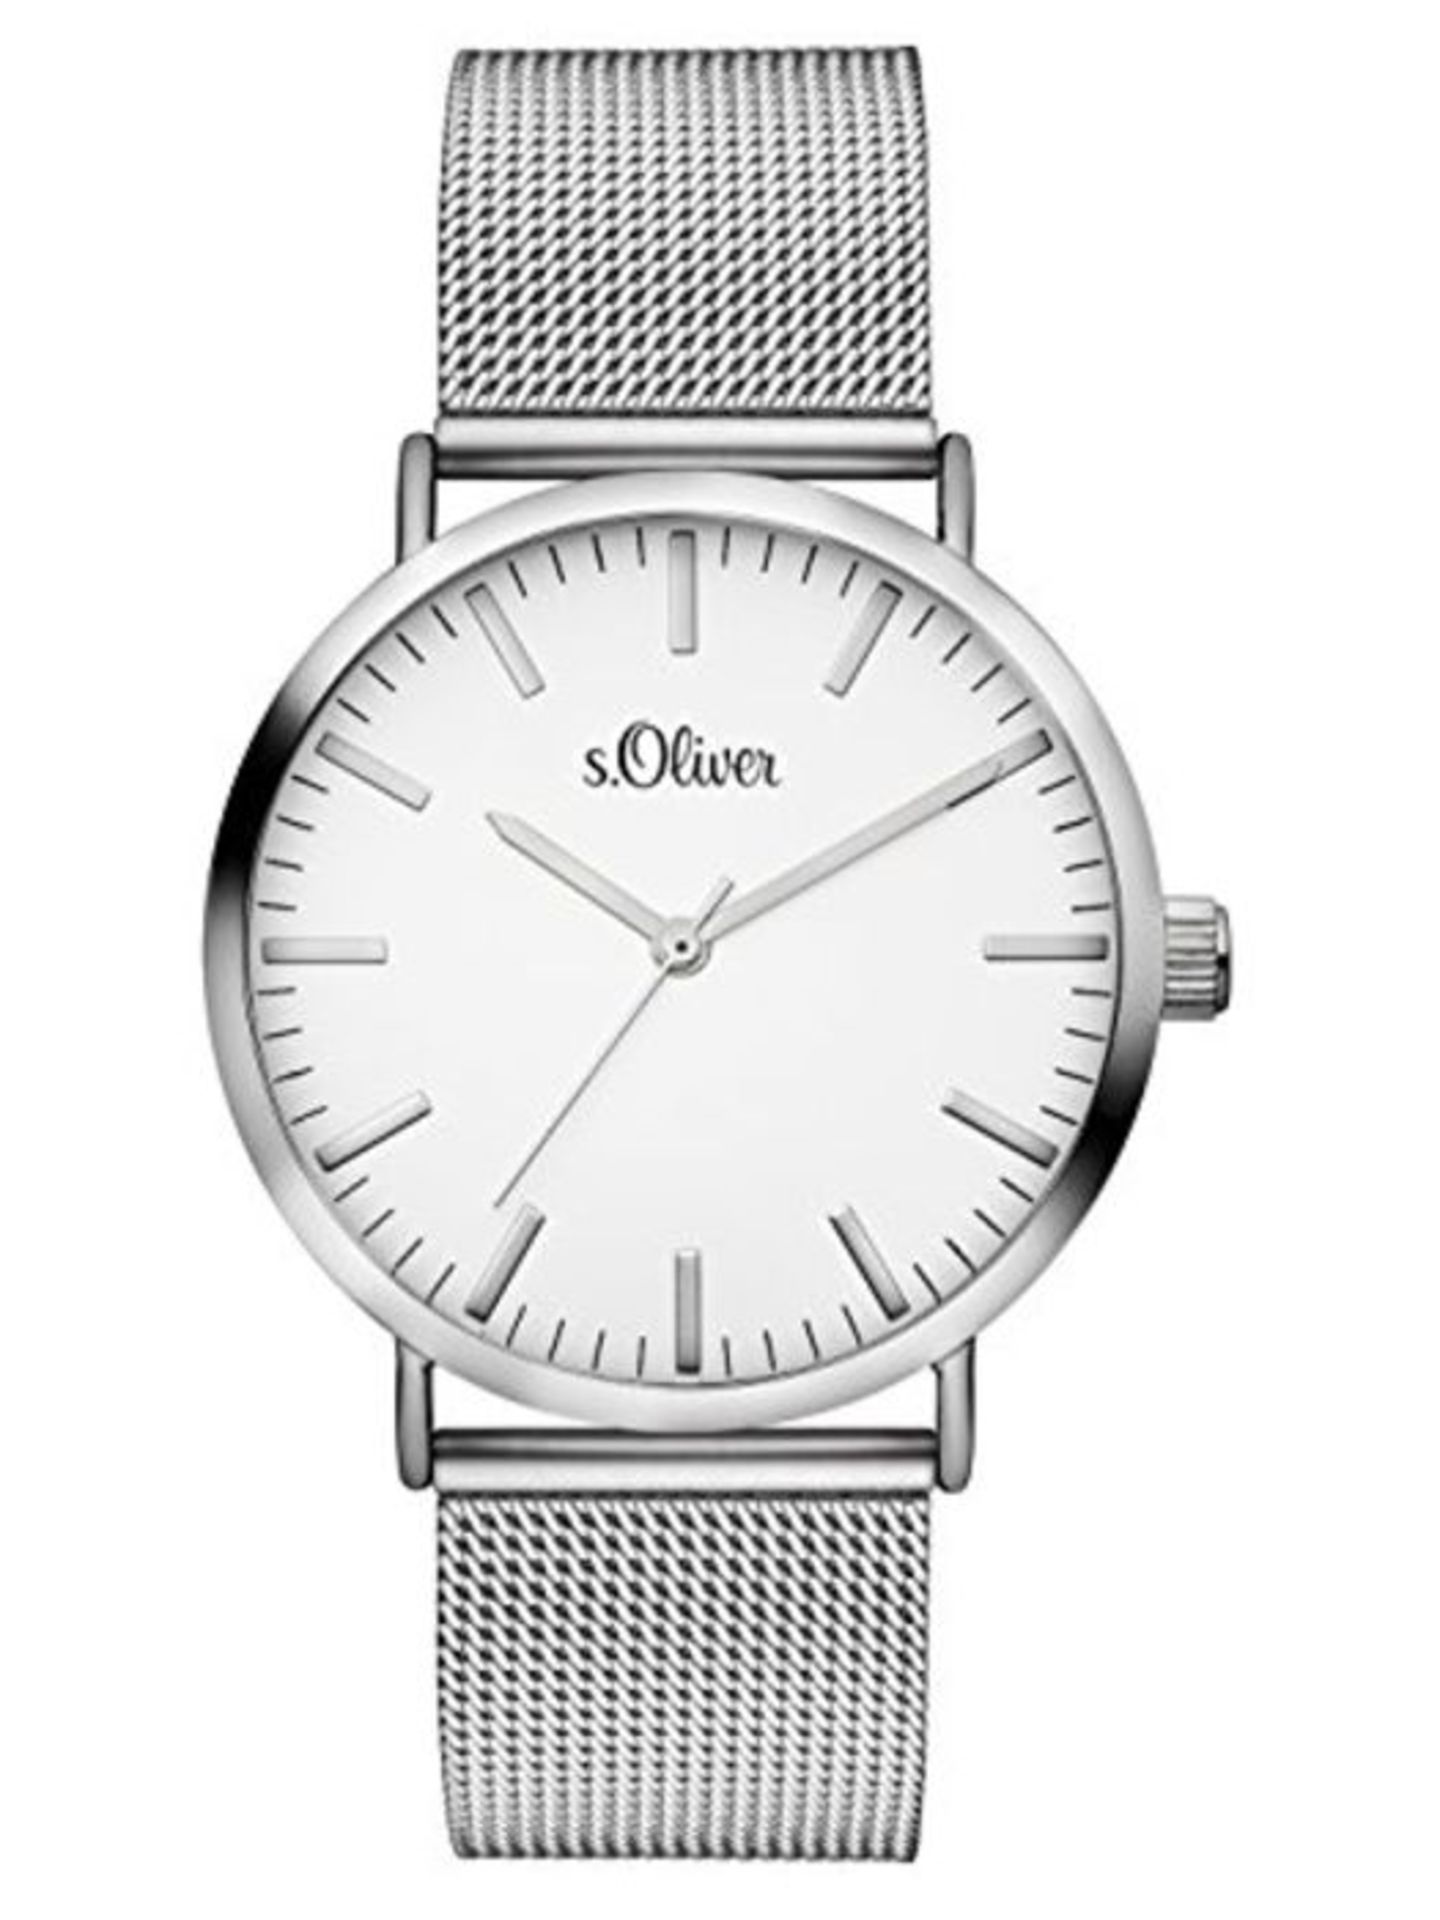 s.Oliver women's analogue quartz wristwatch with stainless steel bracelet SO-3145-MQ - Image 4 of 6